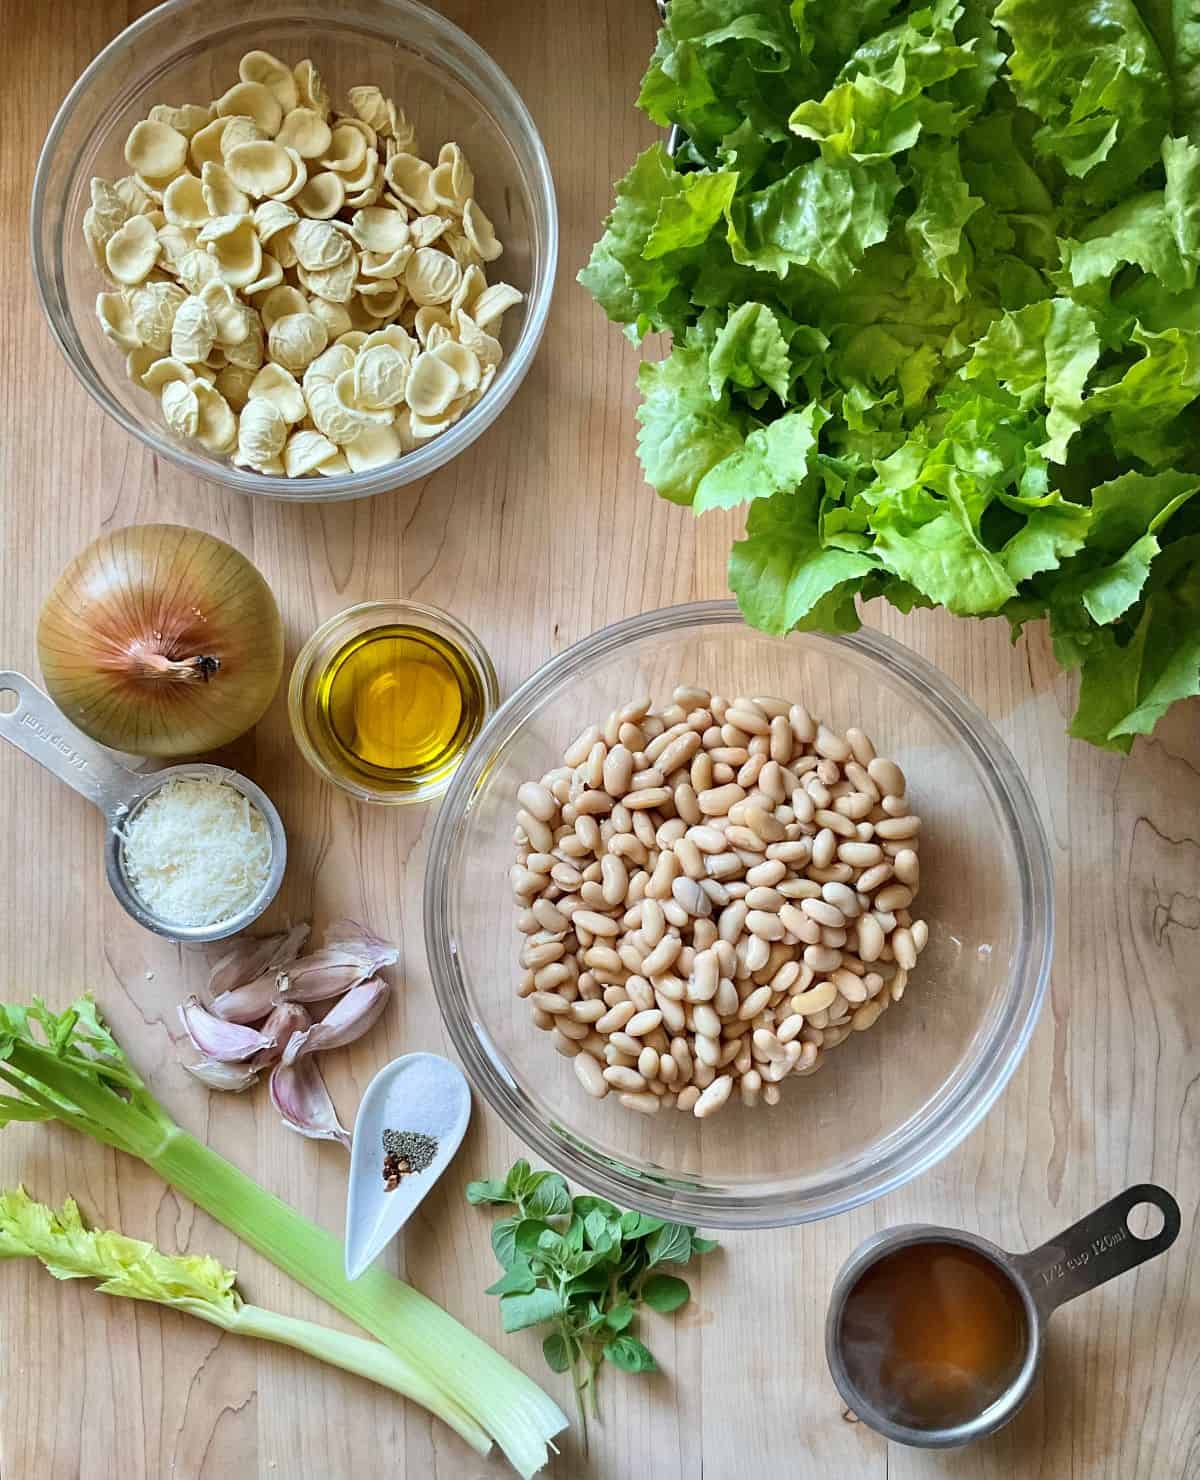 Ingredients to make pasta with white beans and escarole.